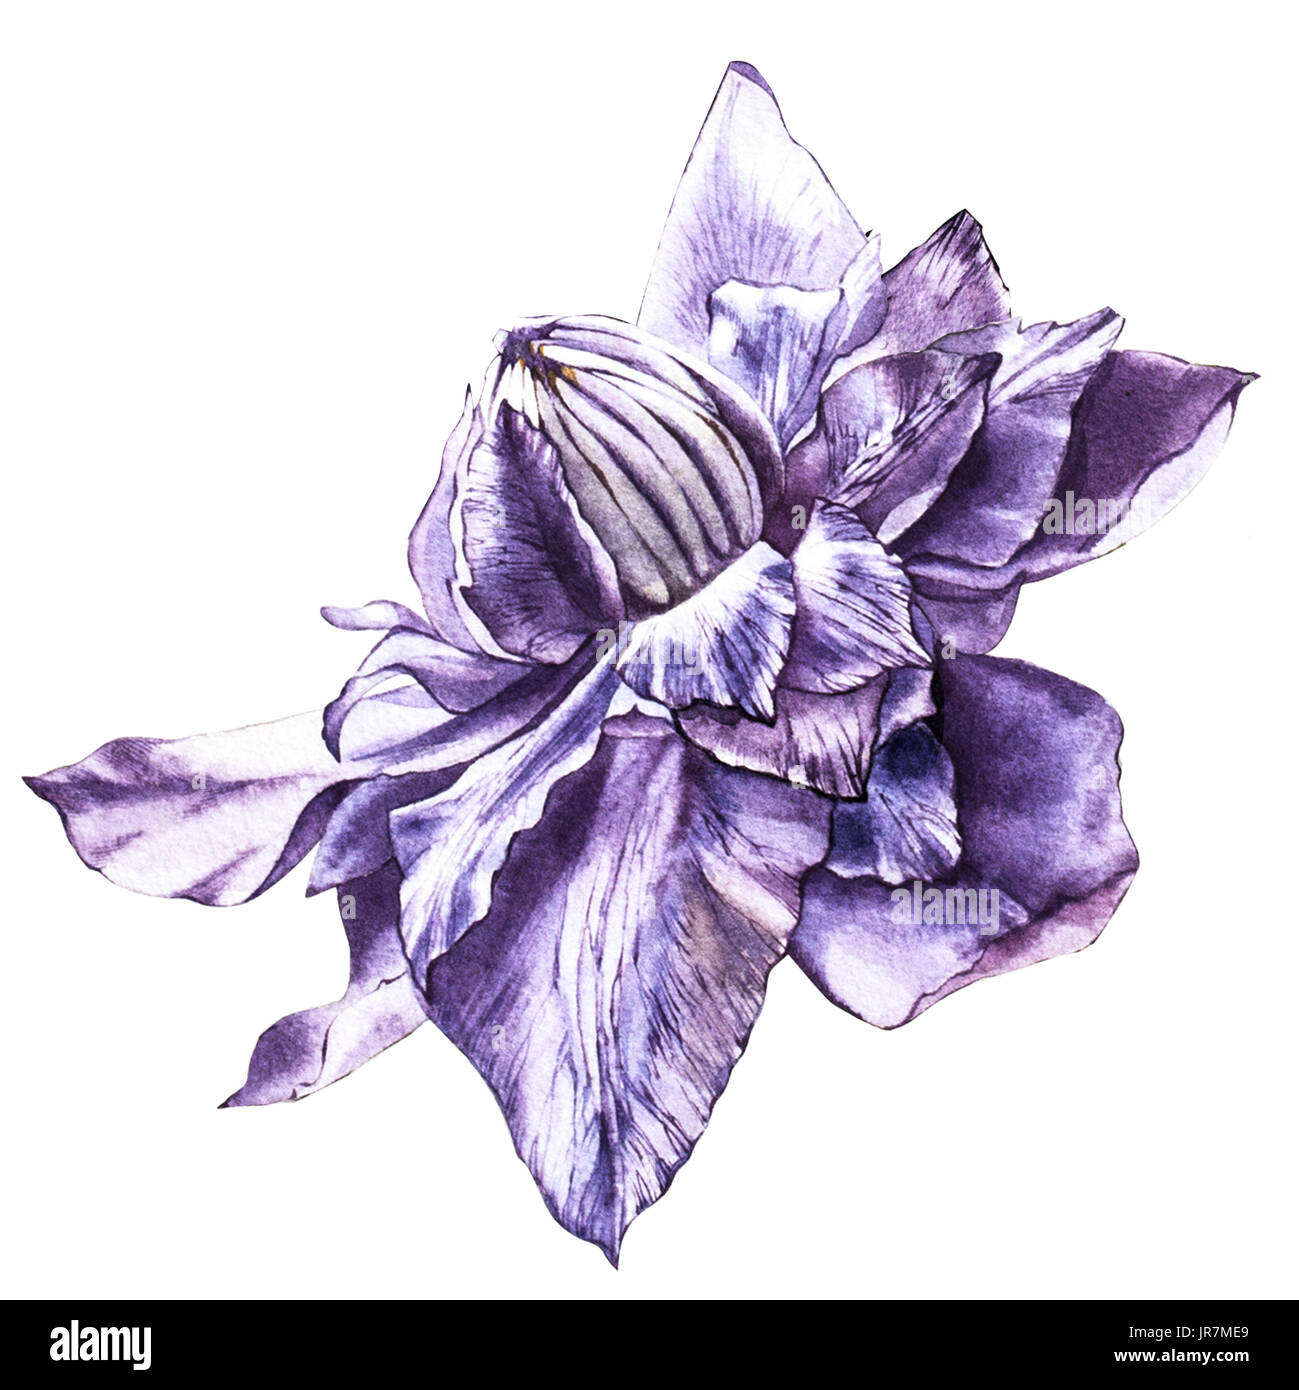 Illustration in watercolor of a clematis flower blossom. Floral card with flowers. Botanical illustration Stock Photo